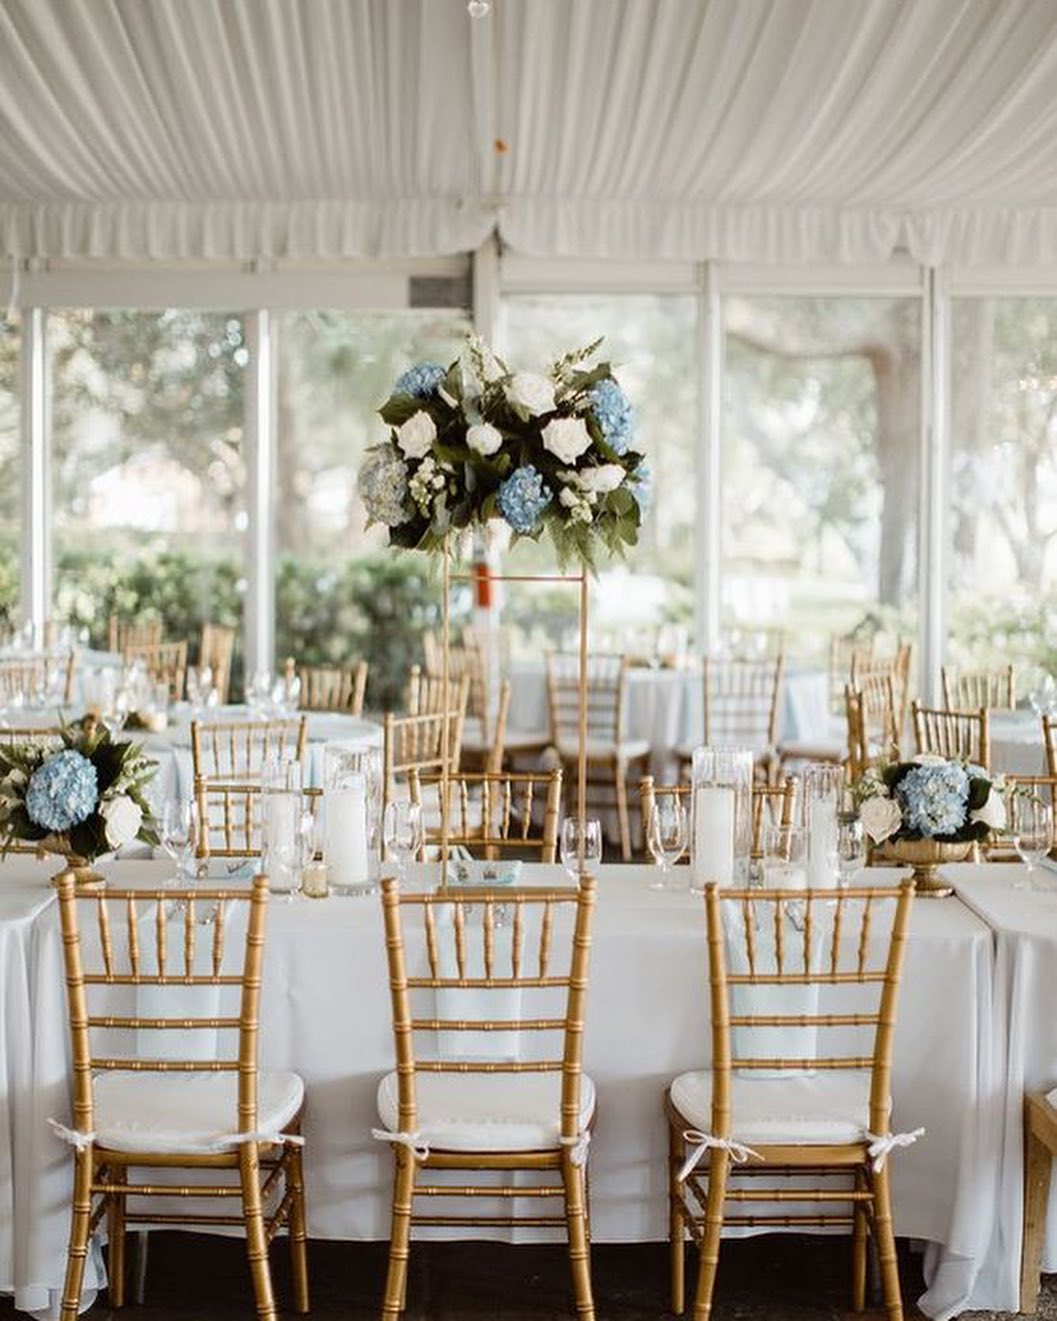 163633358 459899602015864 6829141513448010312 n - When the tables are well set, a welcoming ambience is created for your guests.

To create that allur...